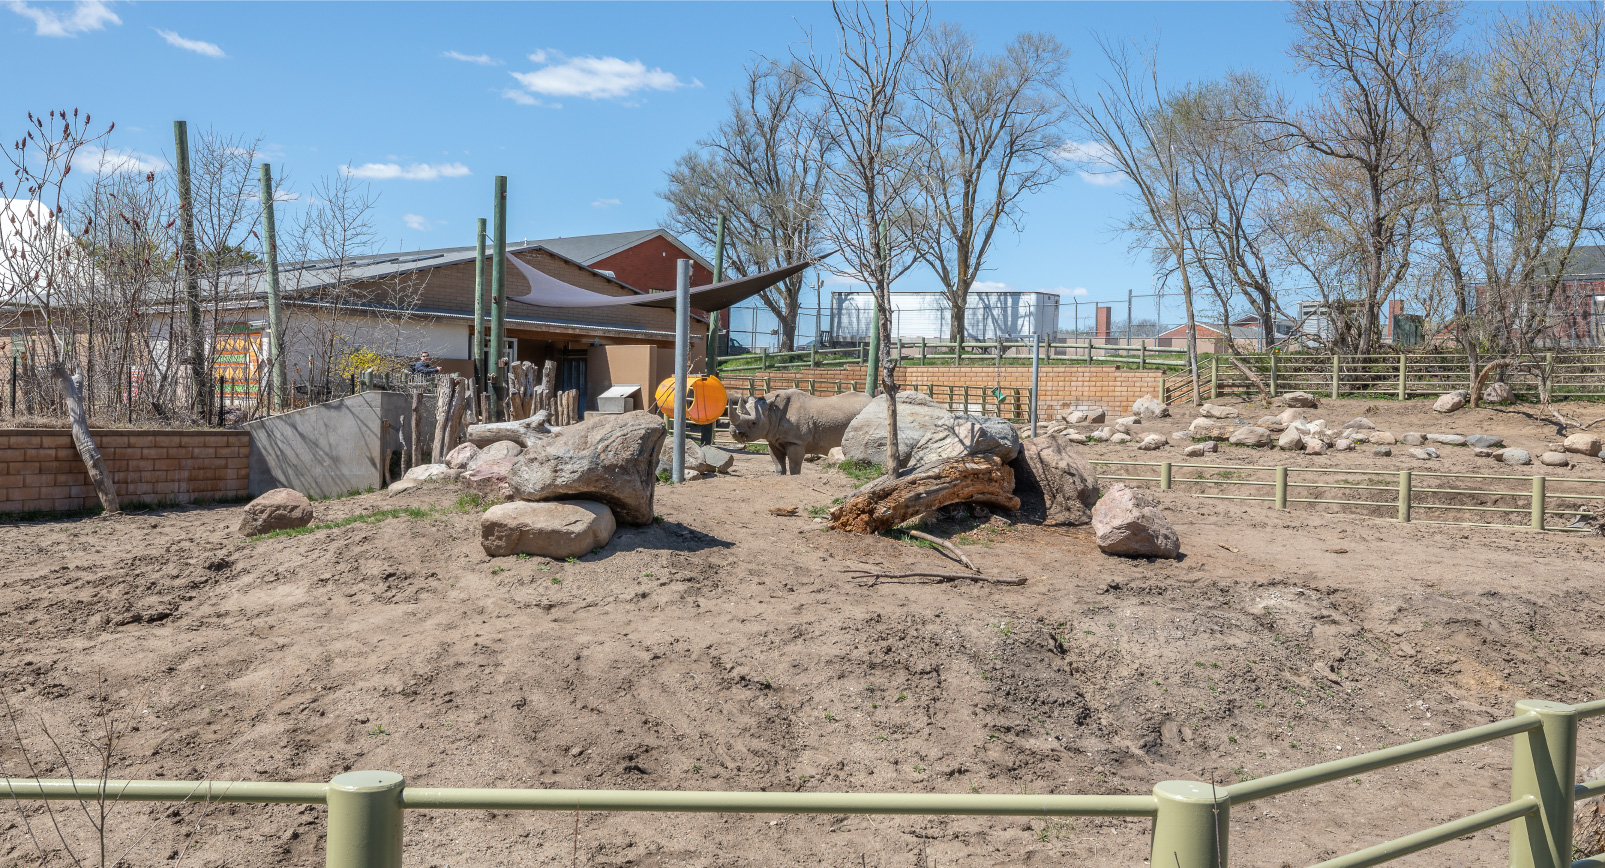 Rhino in enclosure at Blank Park Zoo in Des Moines, Iowa